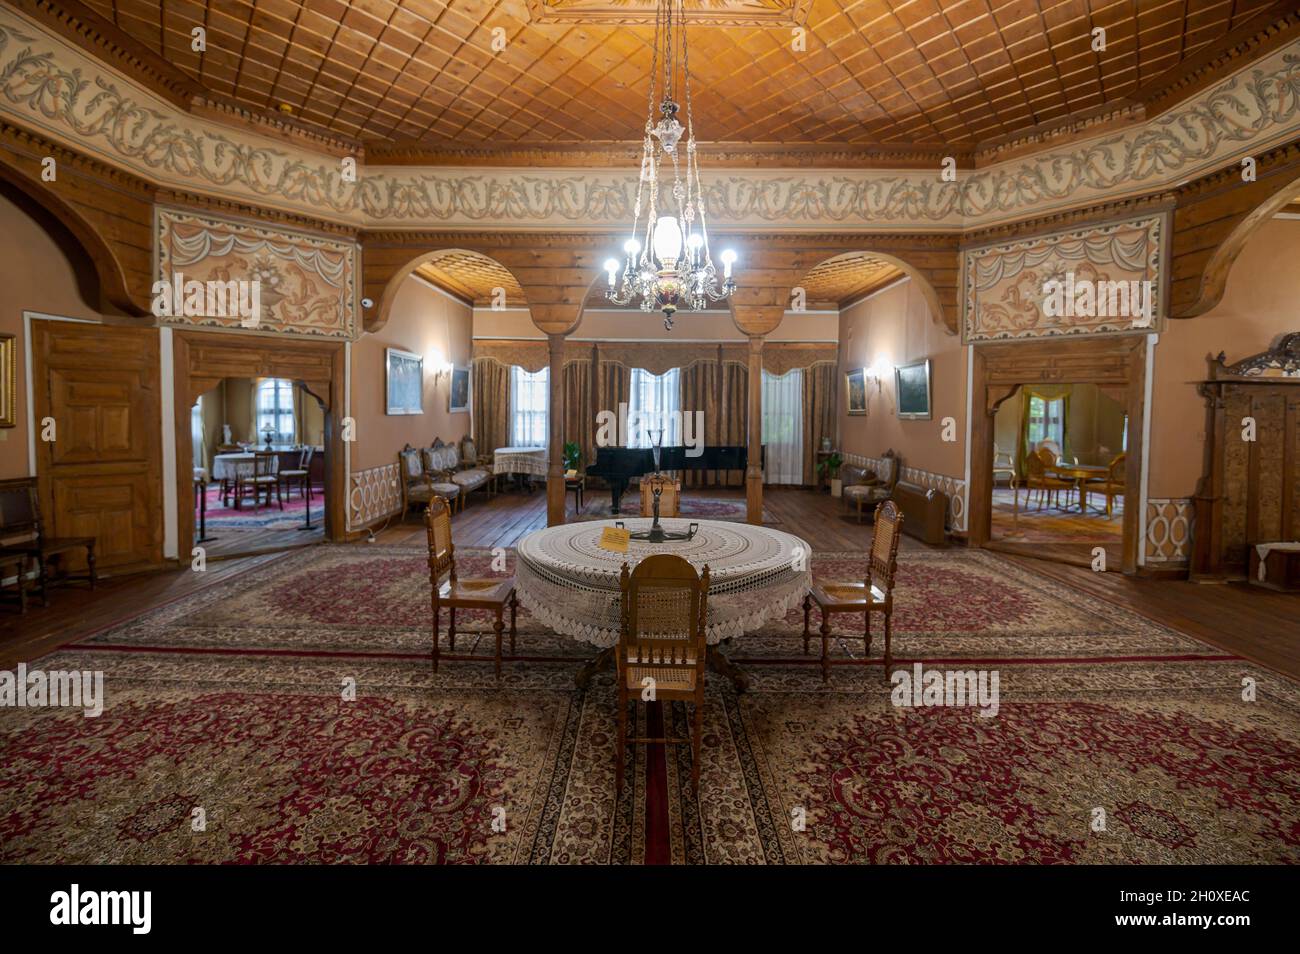 Plovdiv, Bulgaria. Interior of Balabanov House. One of the most beautiful old Bulgarian houses. Stock Photo